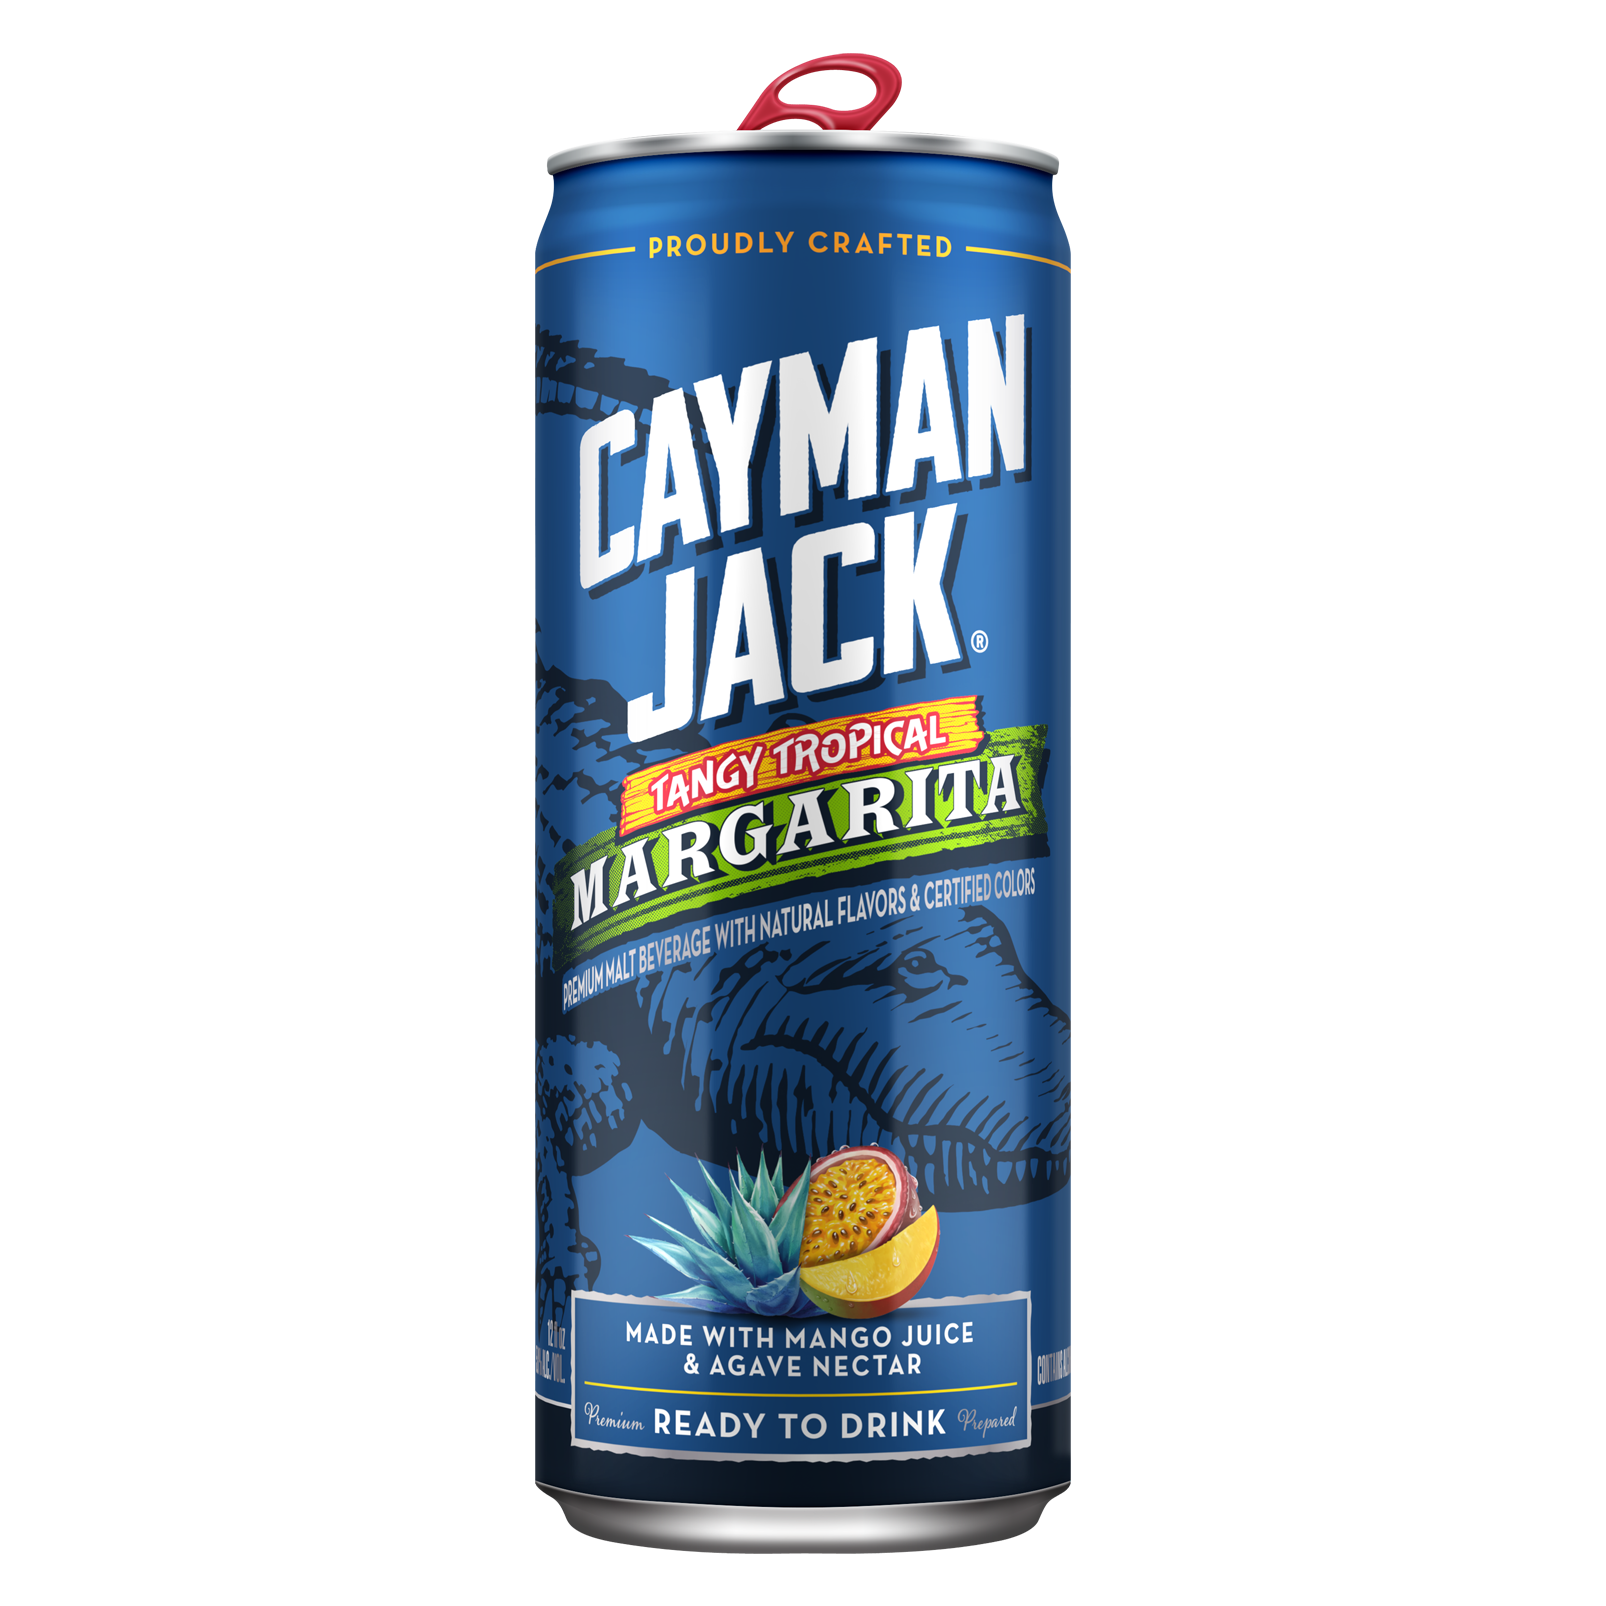 Cayman Jack Tangy Tropical Single 12oz Can 5.8% ABV